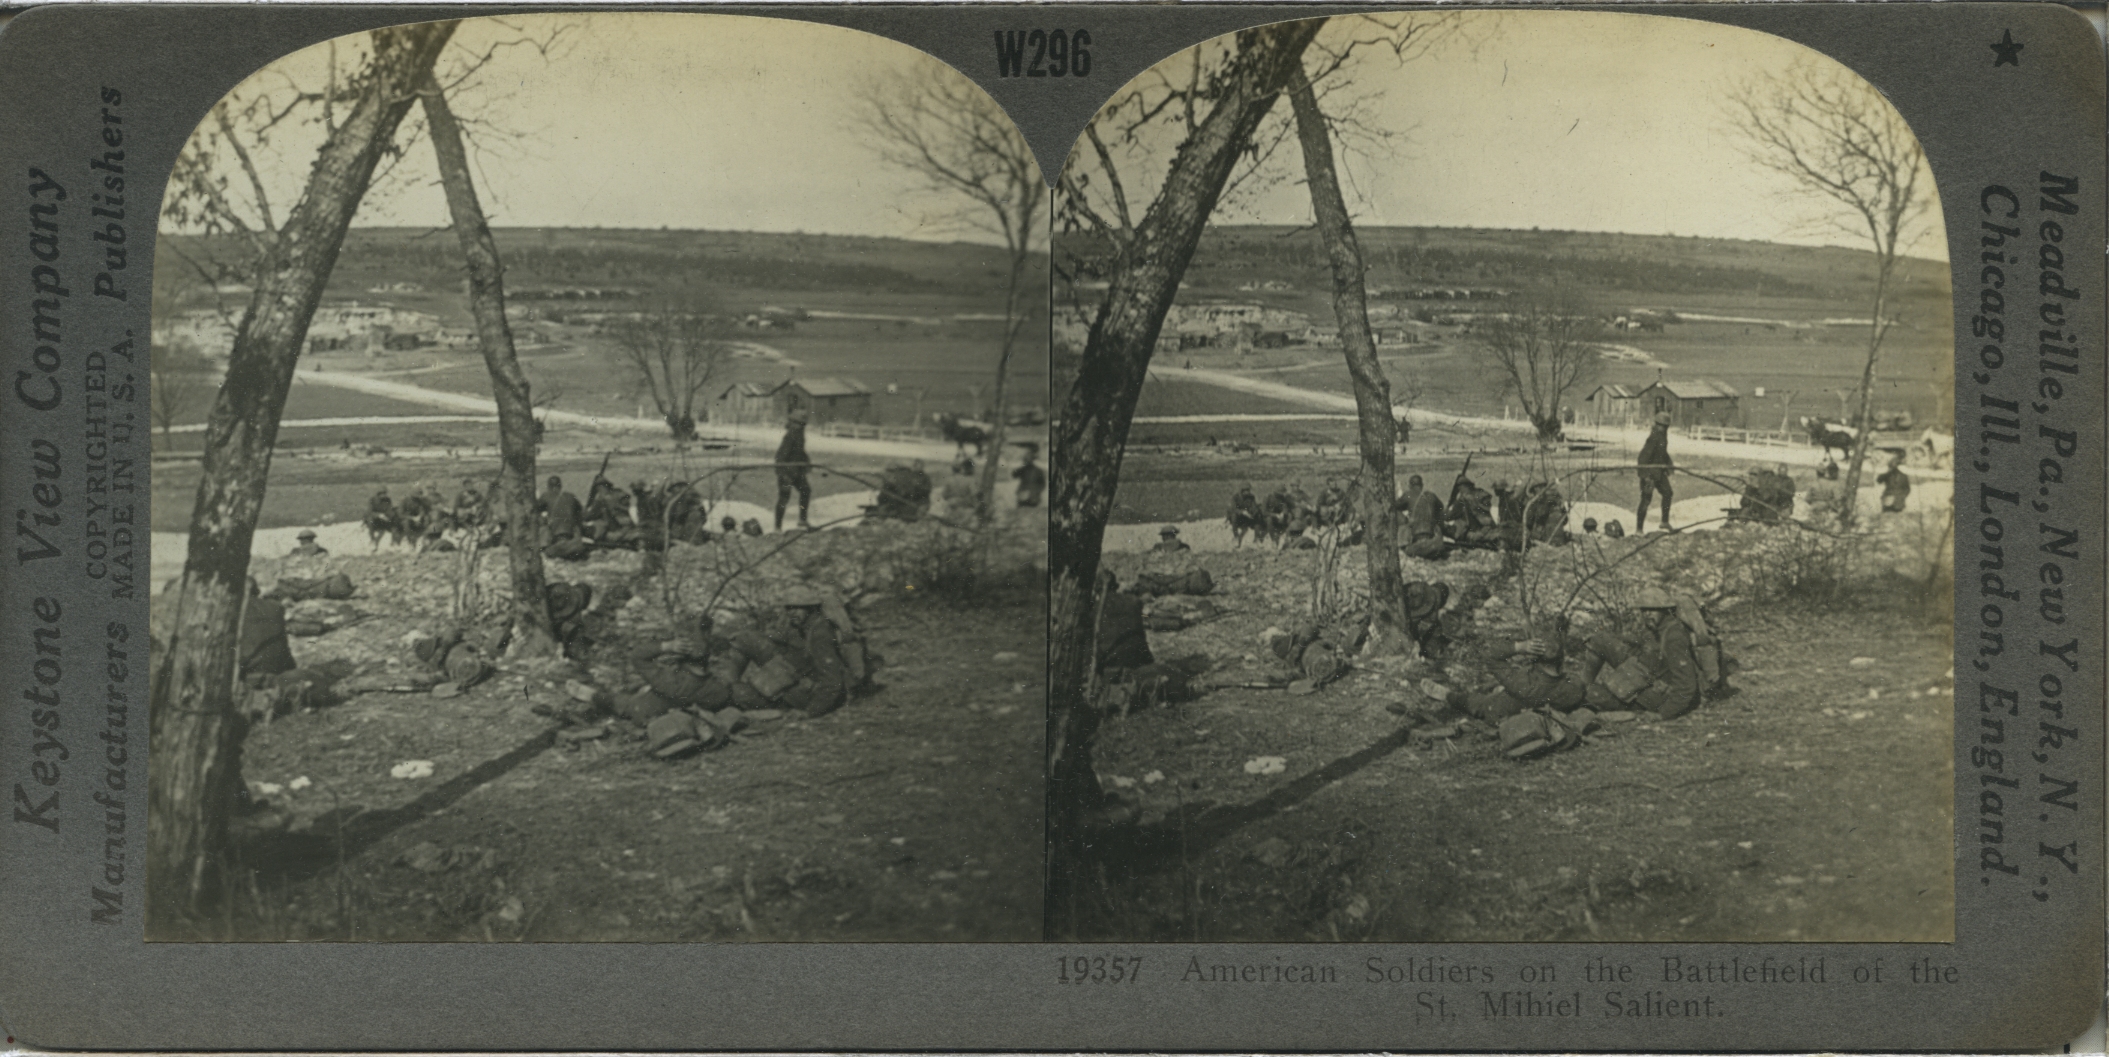 American Soldiers on the Battlefield of the St. Mihiel Salient